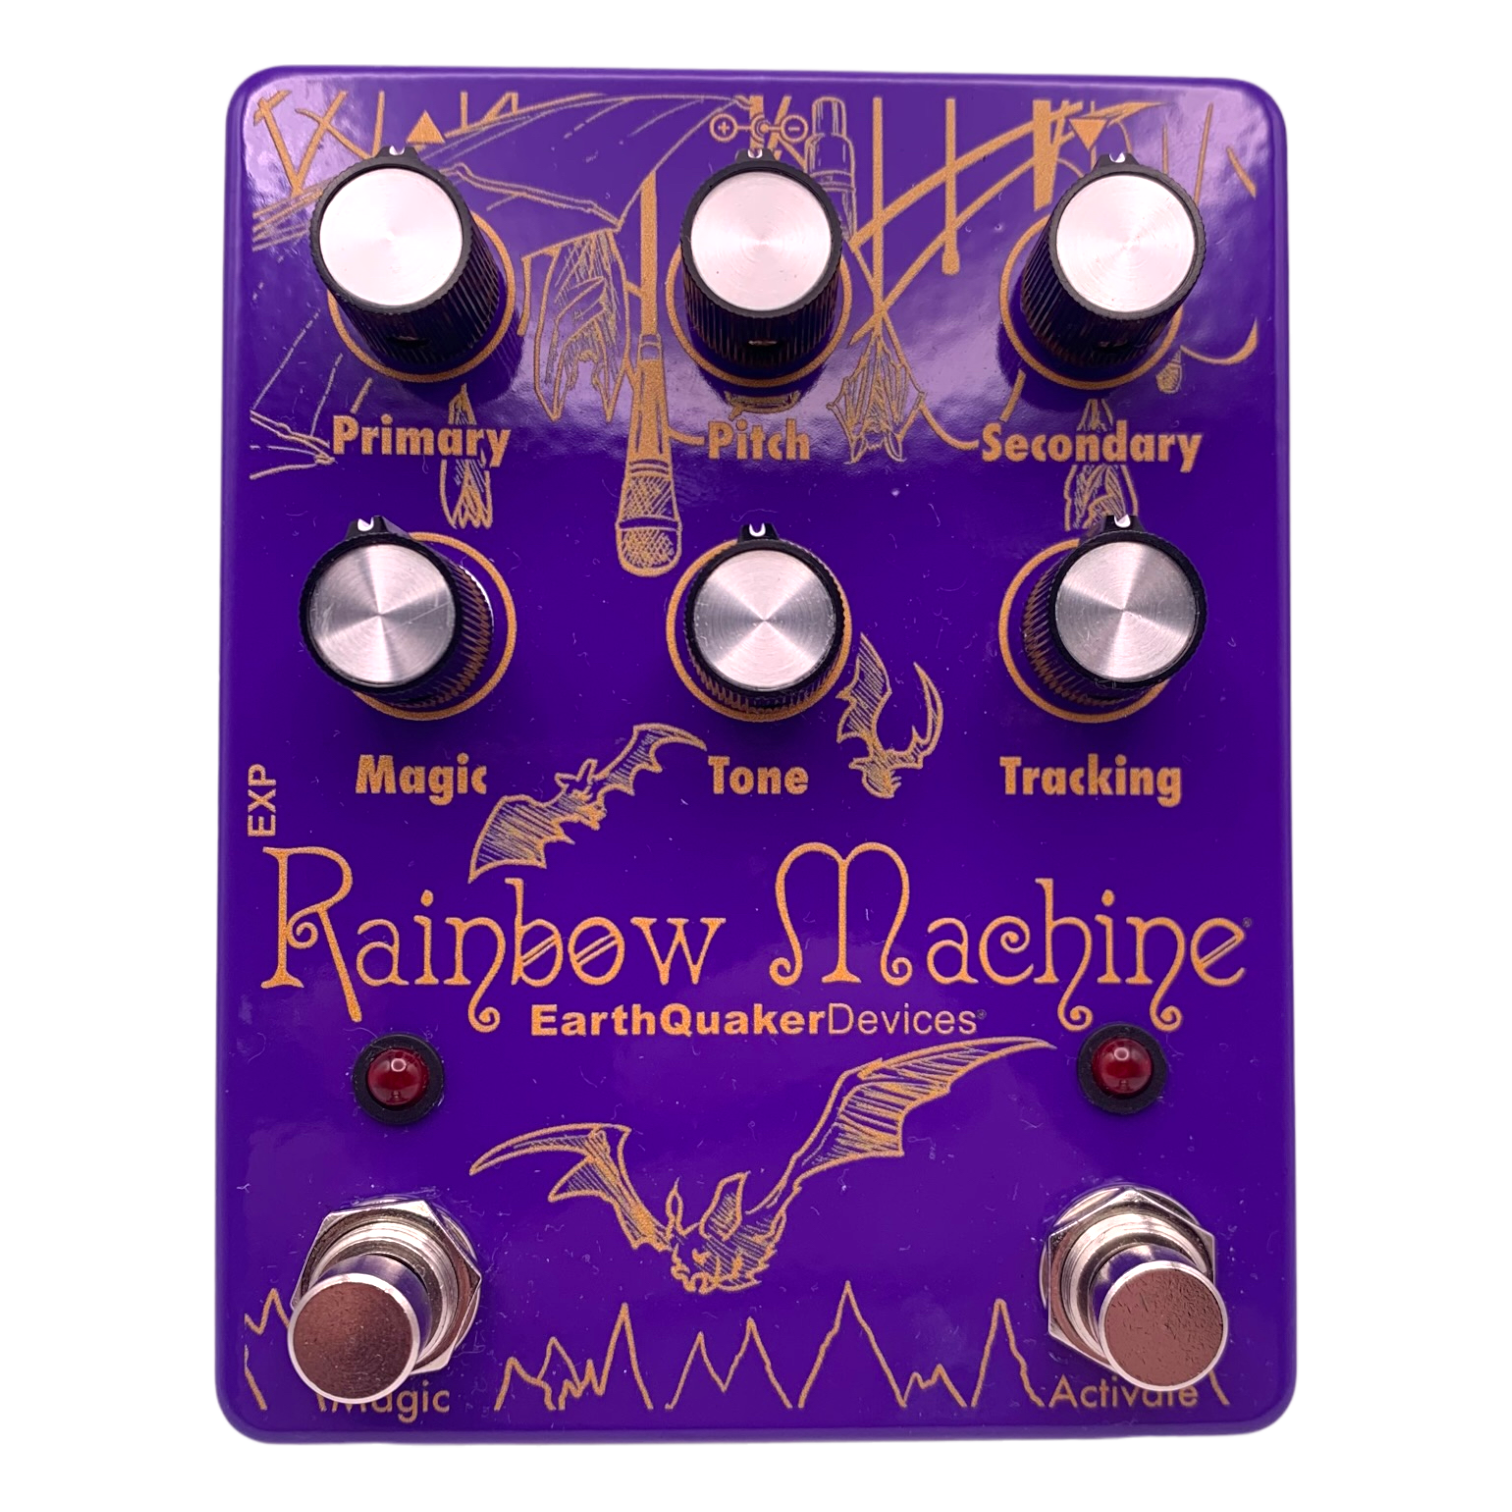 ROCK HALL X EARTHQUAKER DEVICES - LIMITED EDITION RAINBOW MACHINE 